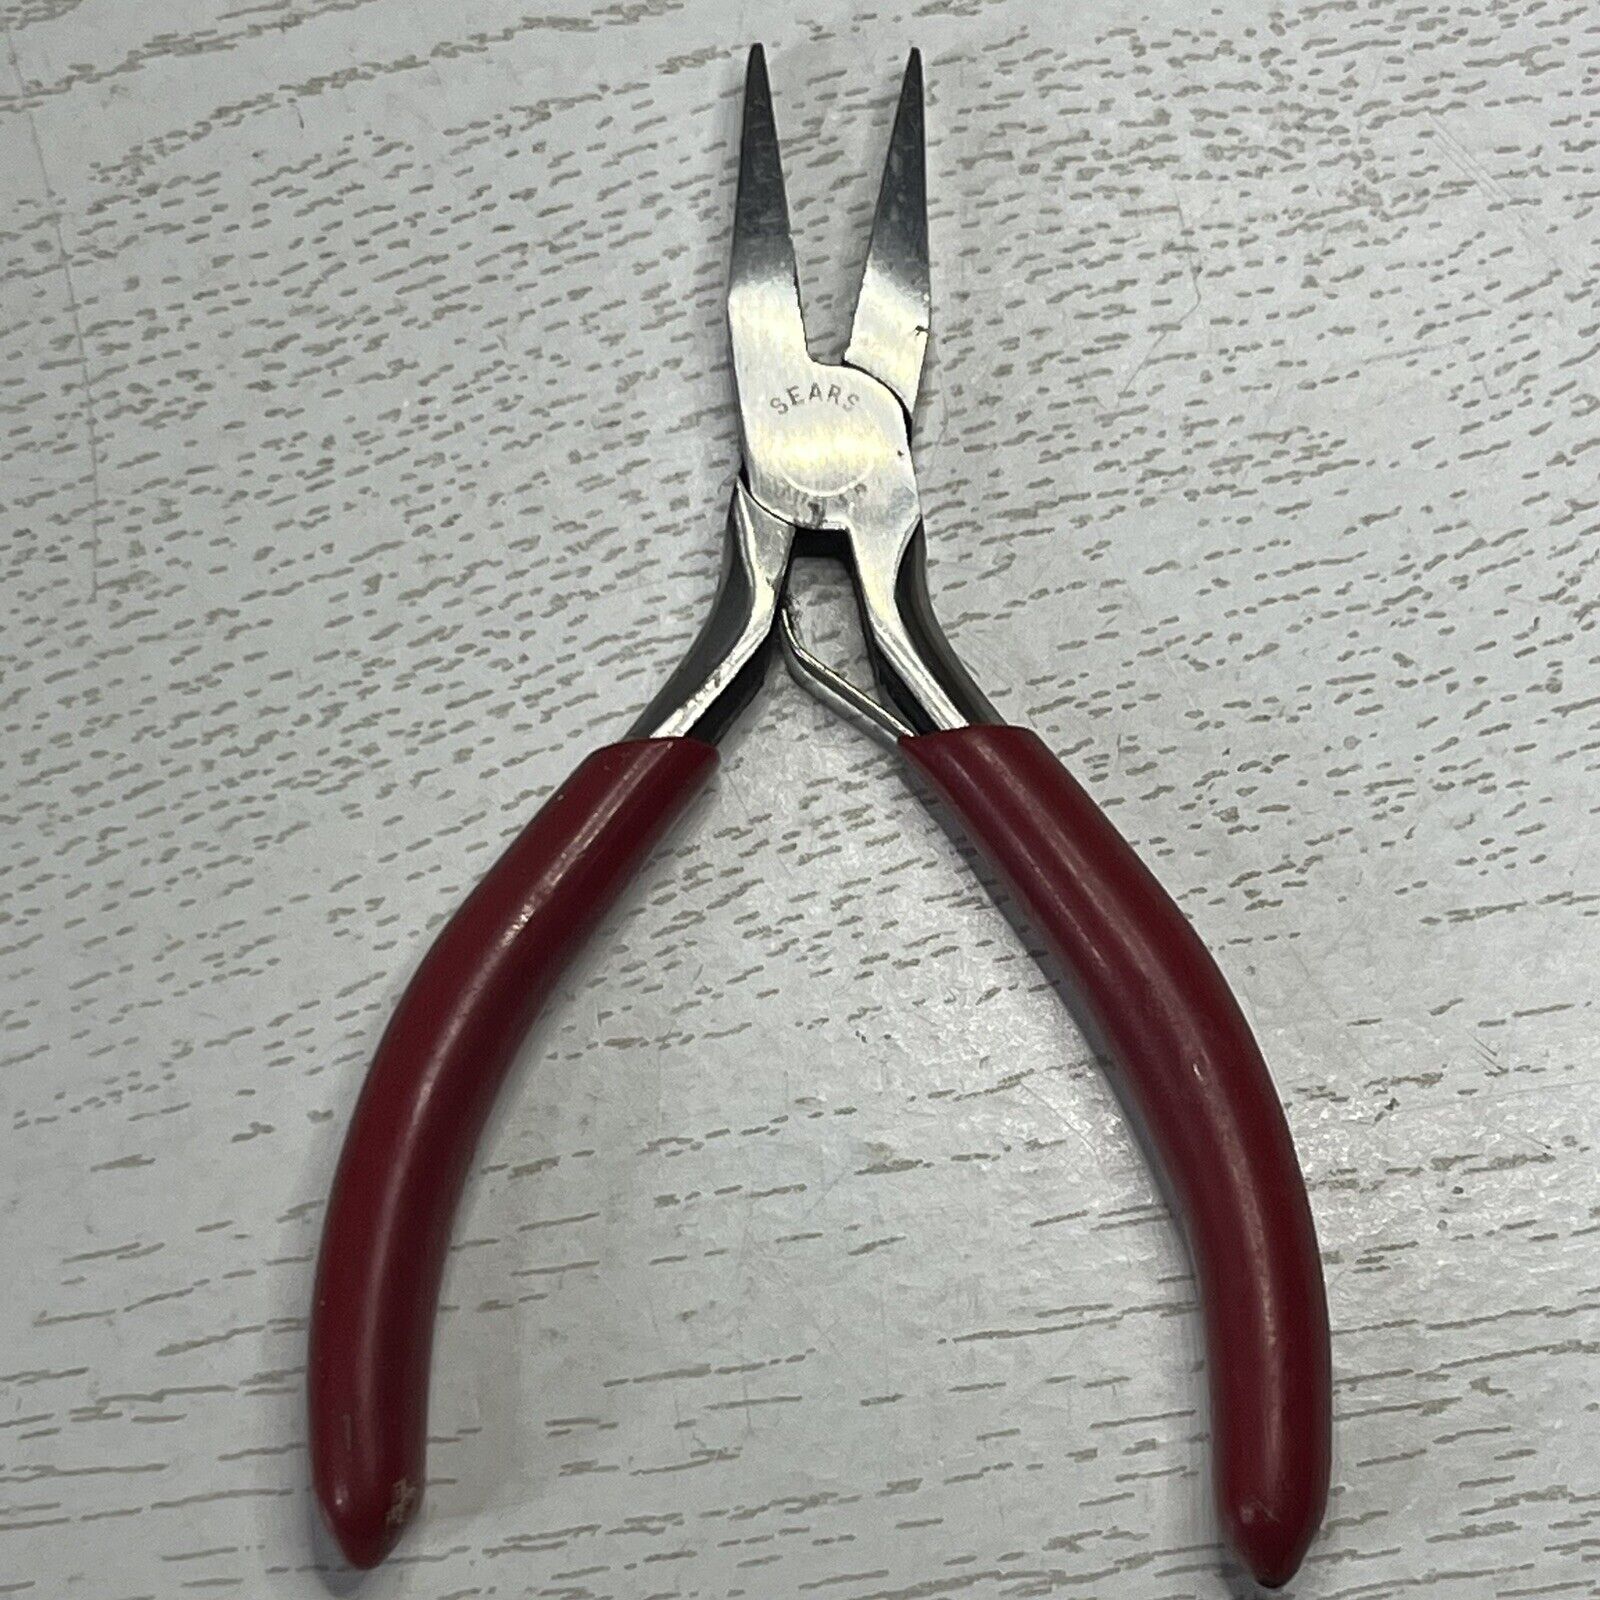 Vintage Sears 30034 4.5” Wide Mouth Spring Loaded Needle Nose Pliers Red Handle